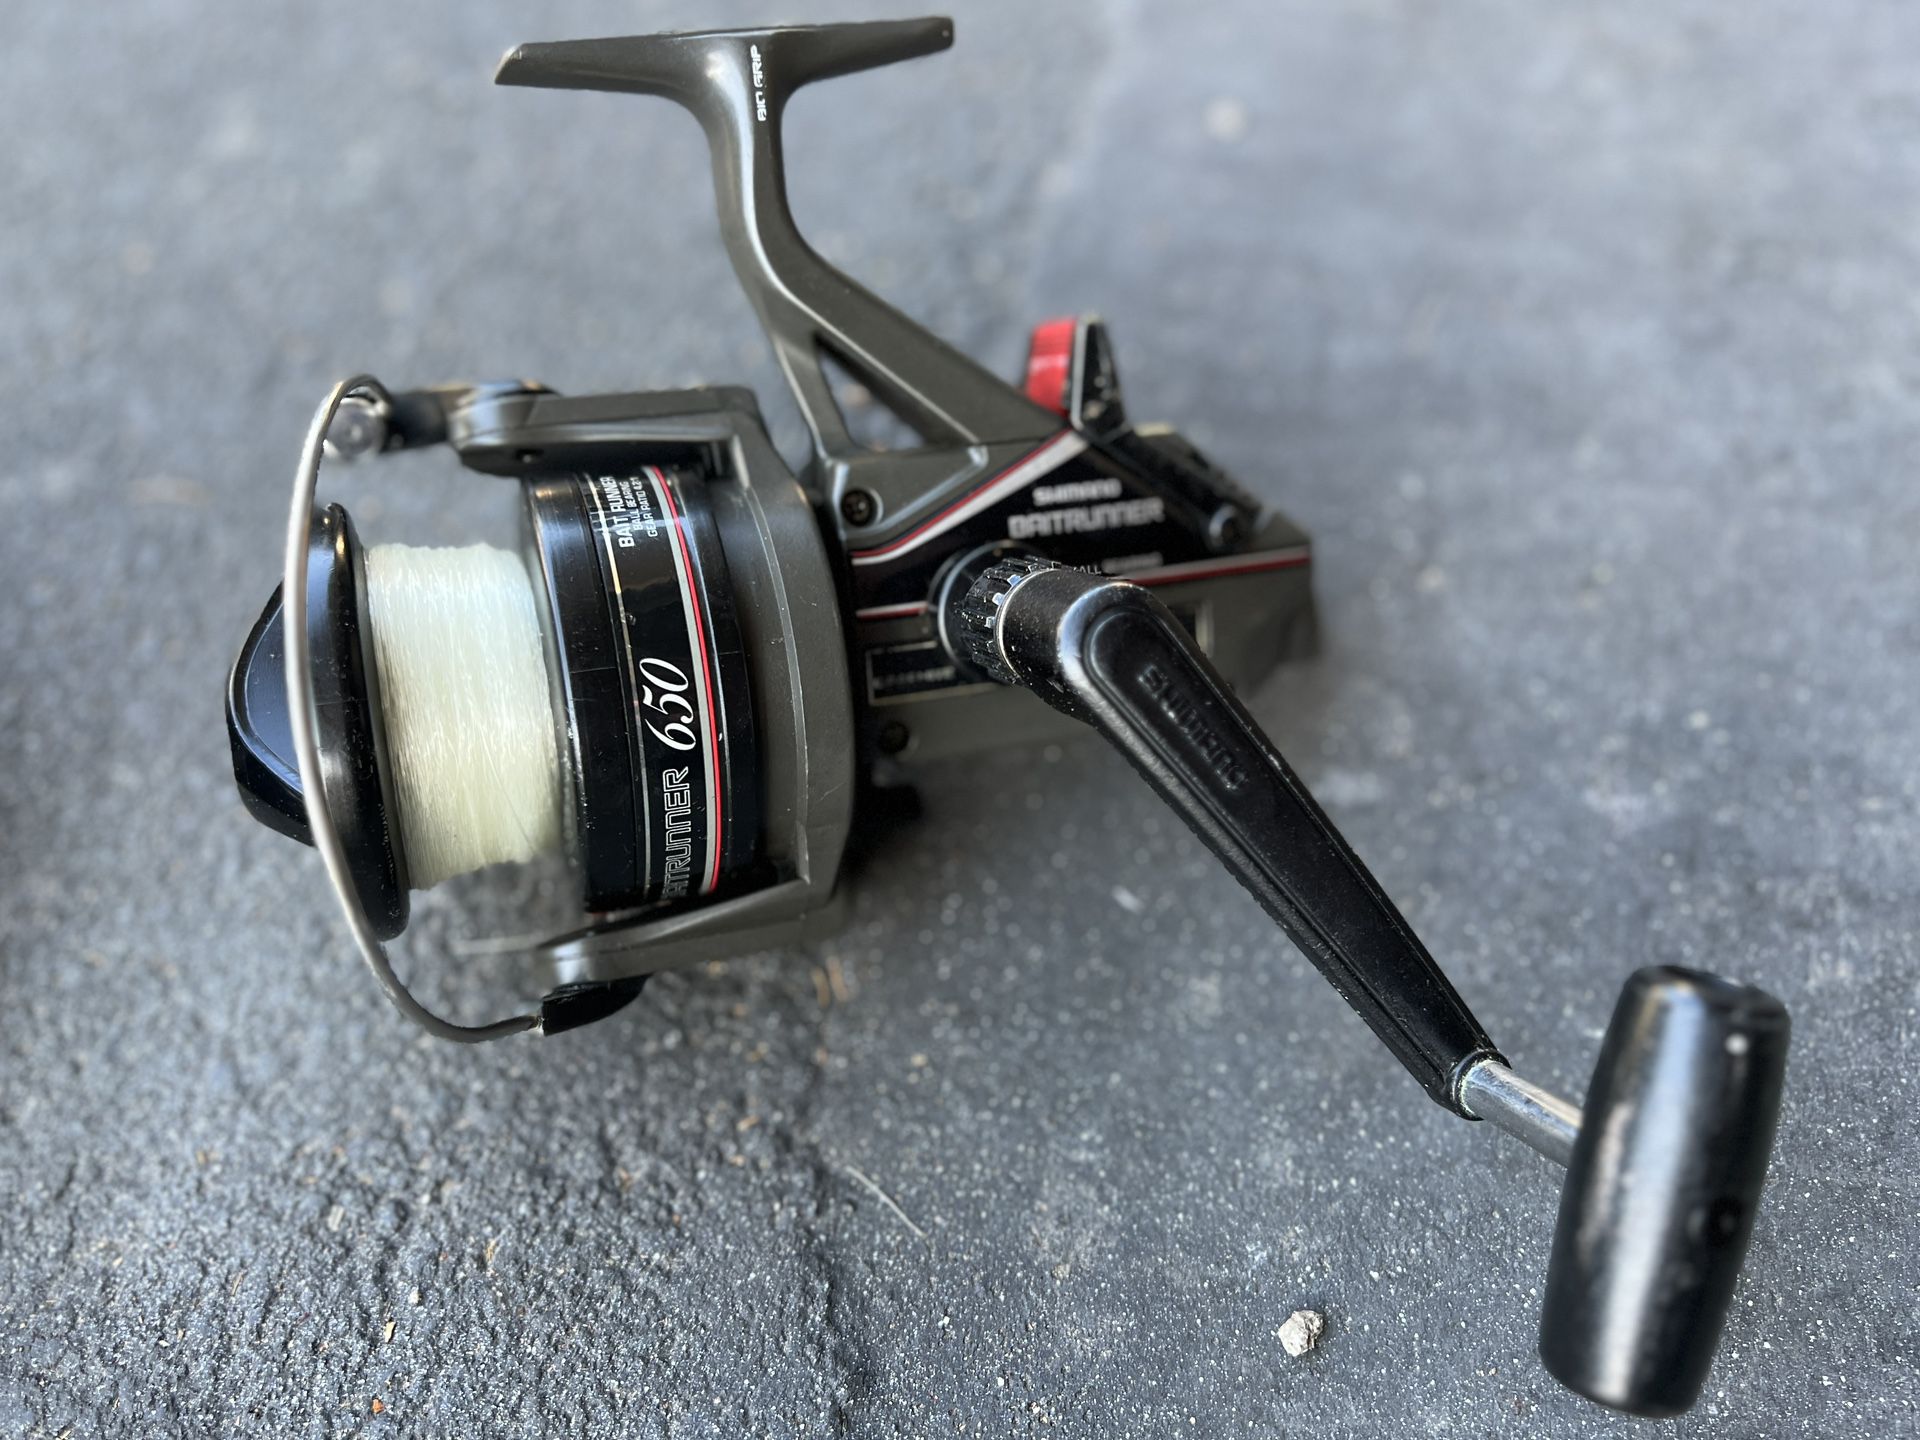 Shimano Bait Runner 650 Fishing Reel for Sale in Buena Park, CA - OfferUp